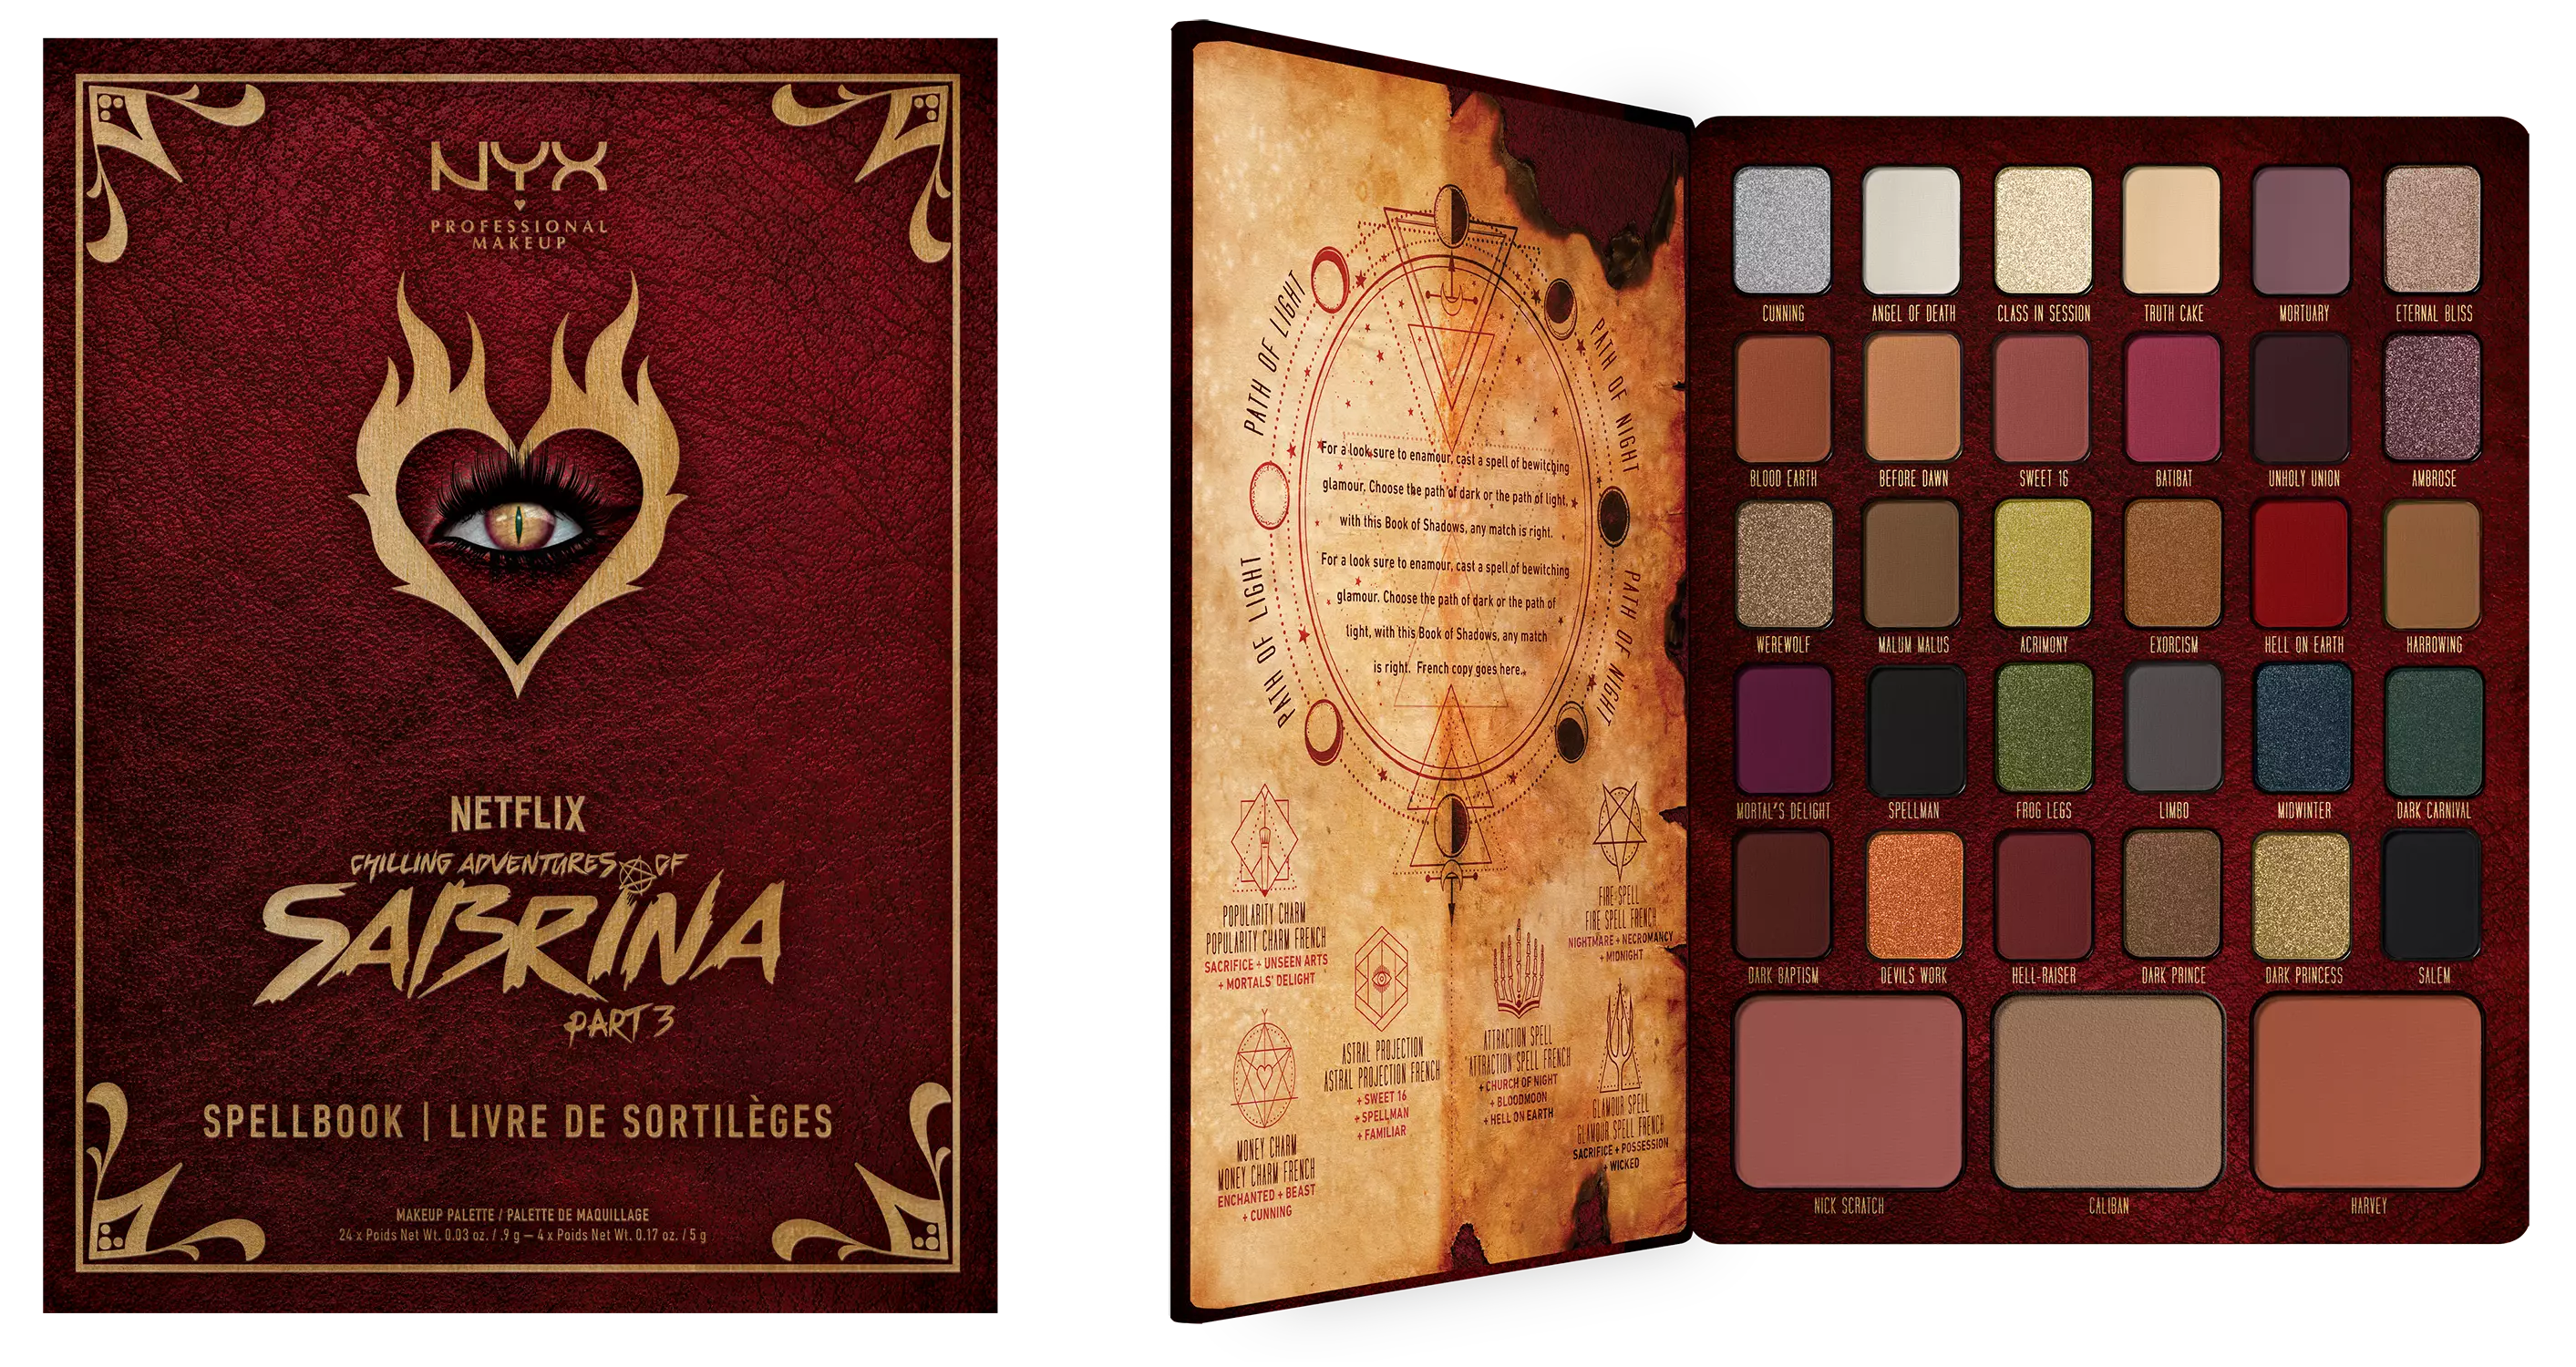 The Spellbook palette contains 30 shades and is priced at £35 (